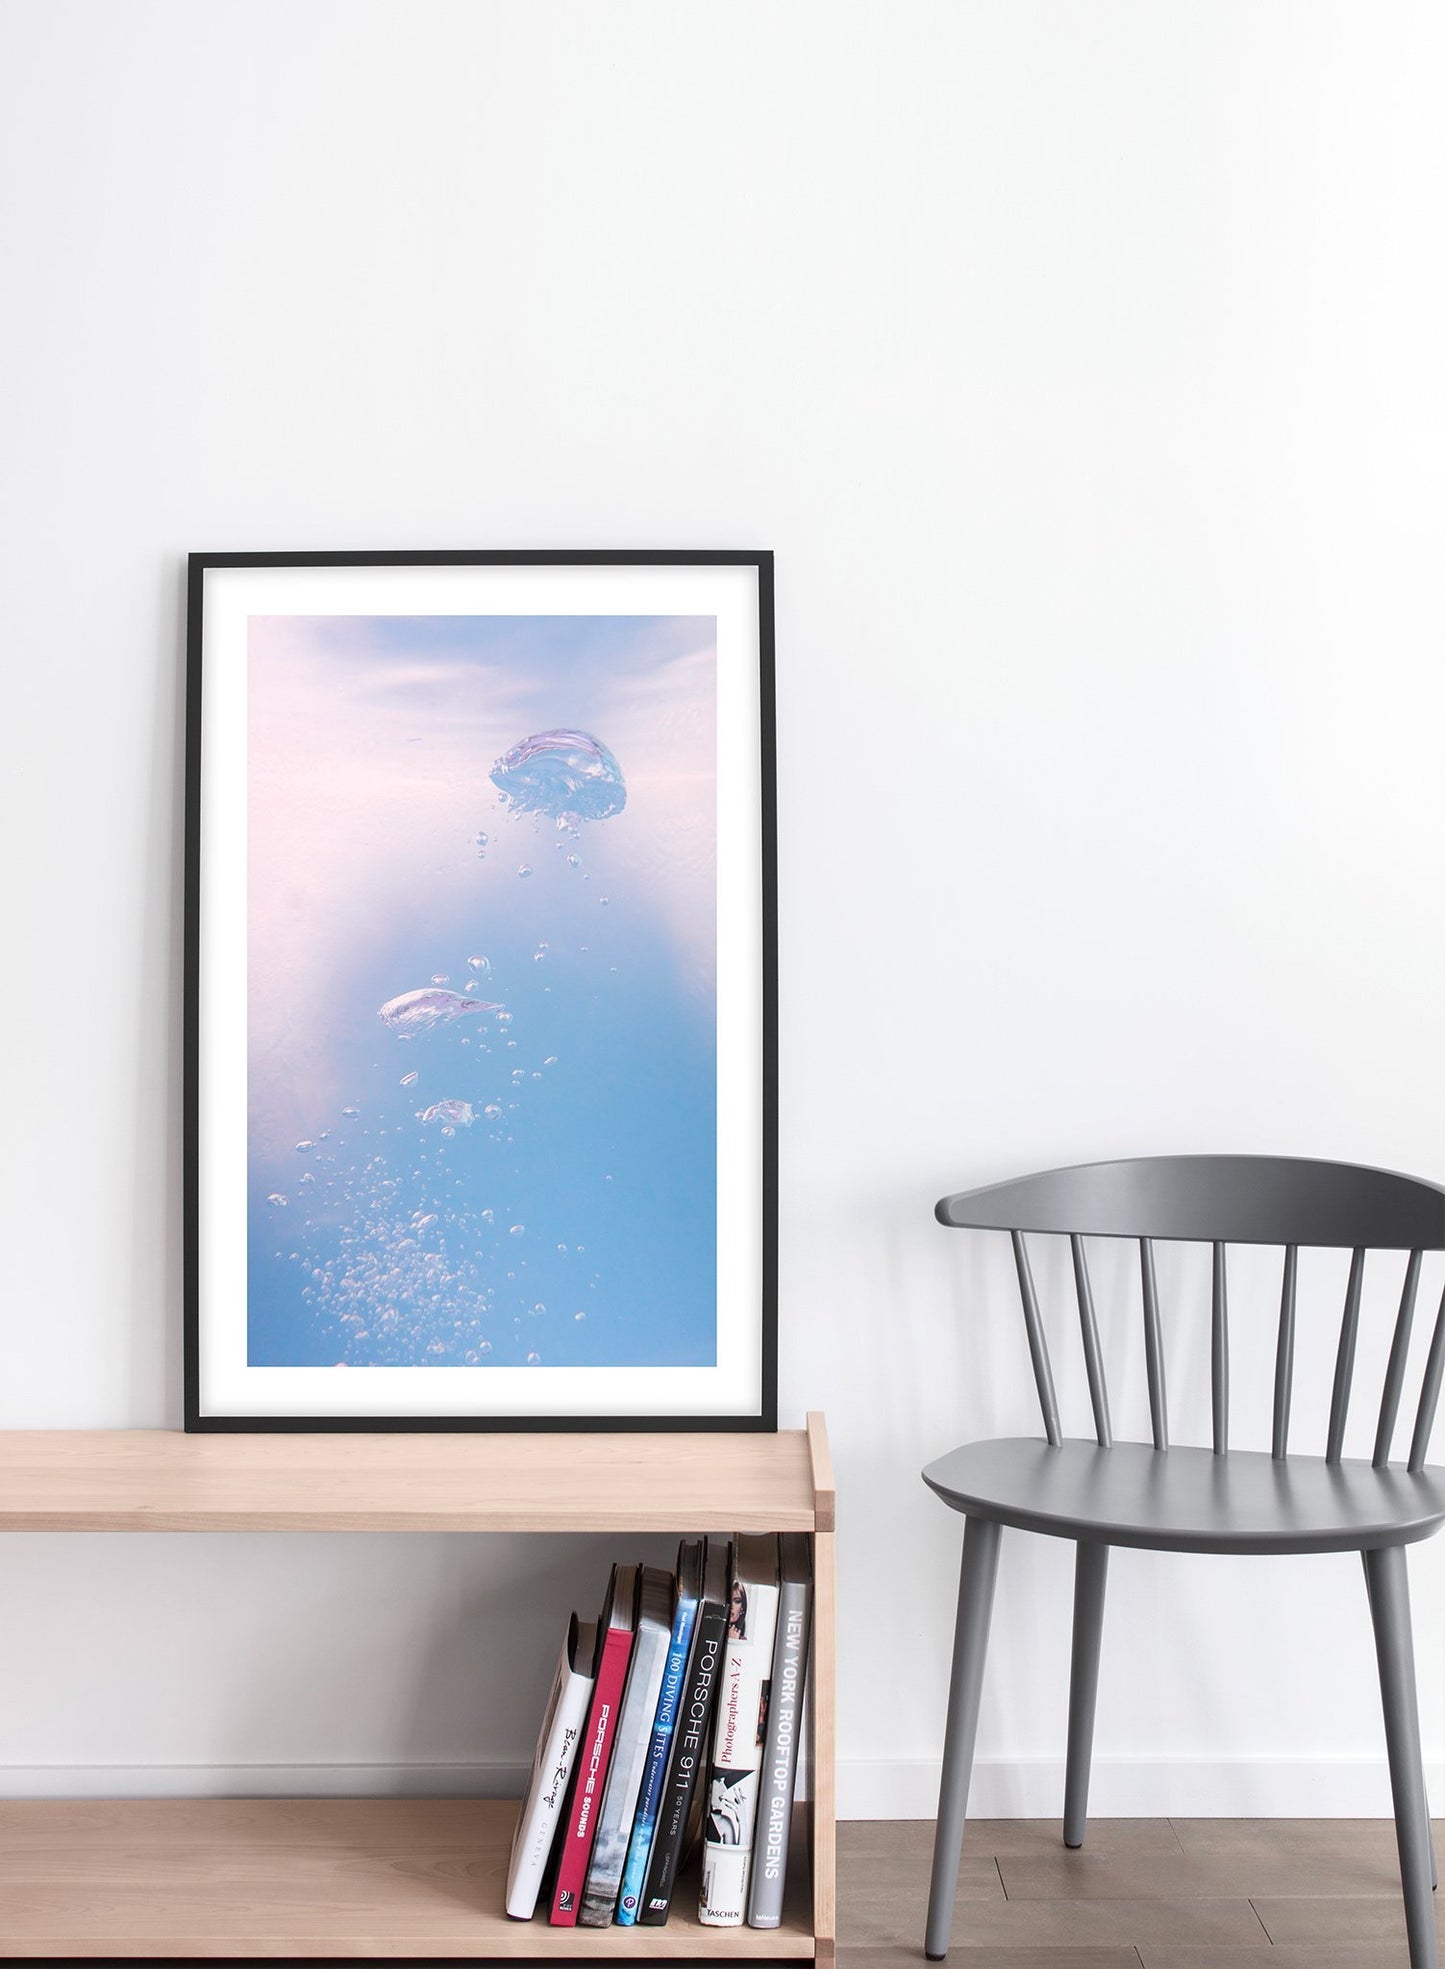 Ripple effect modern minimalist nature photography poster of bubble in water by Opposite Wall - Living Room